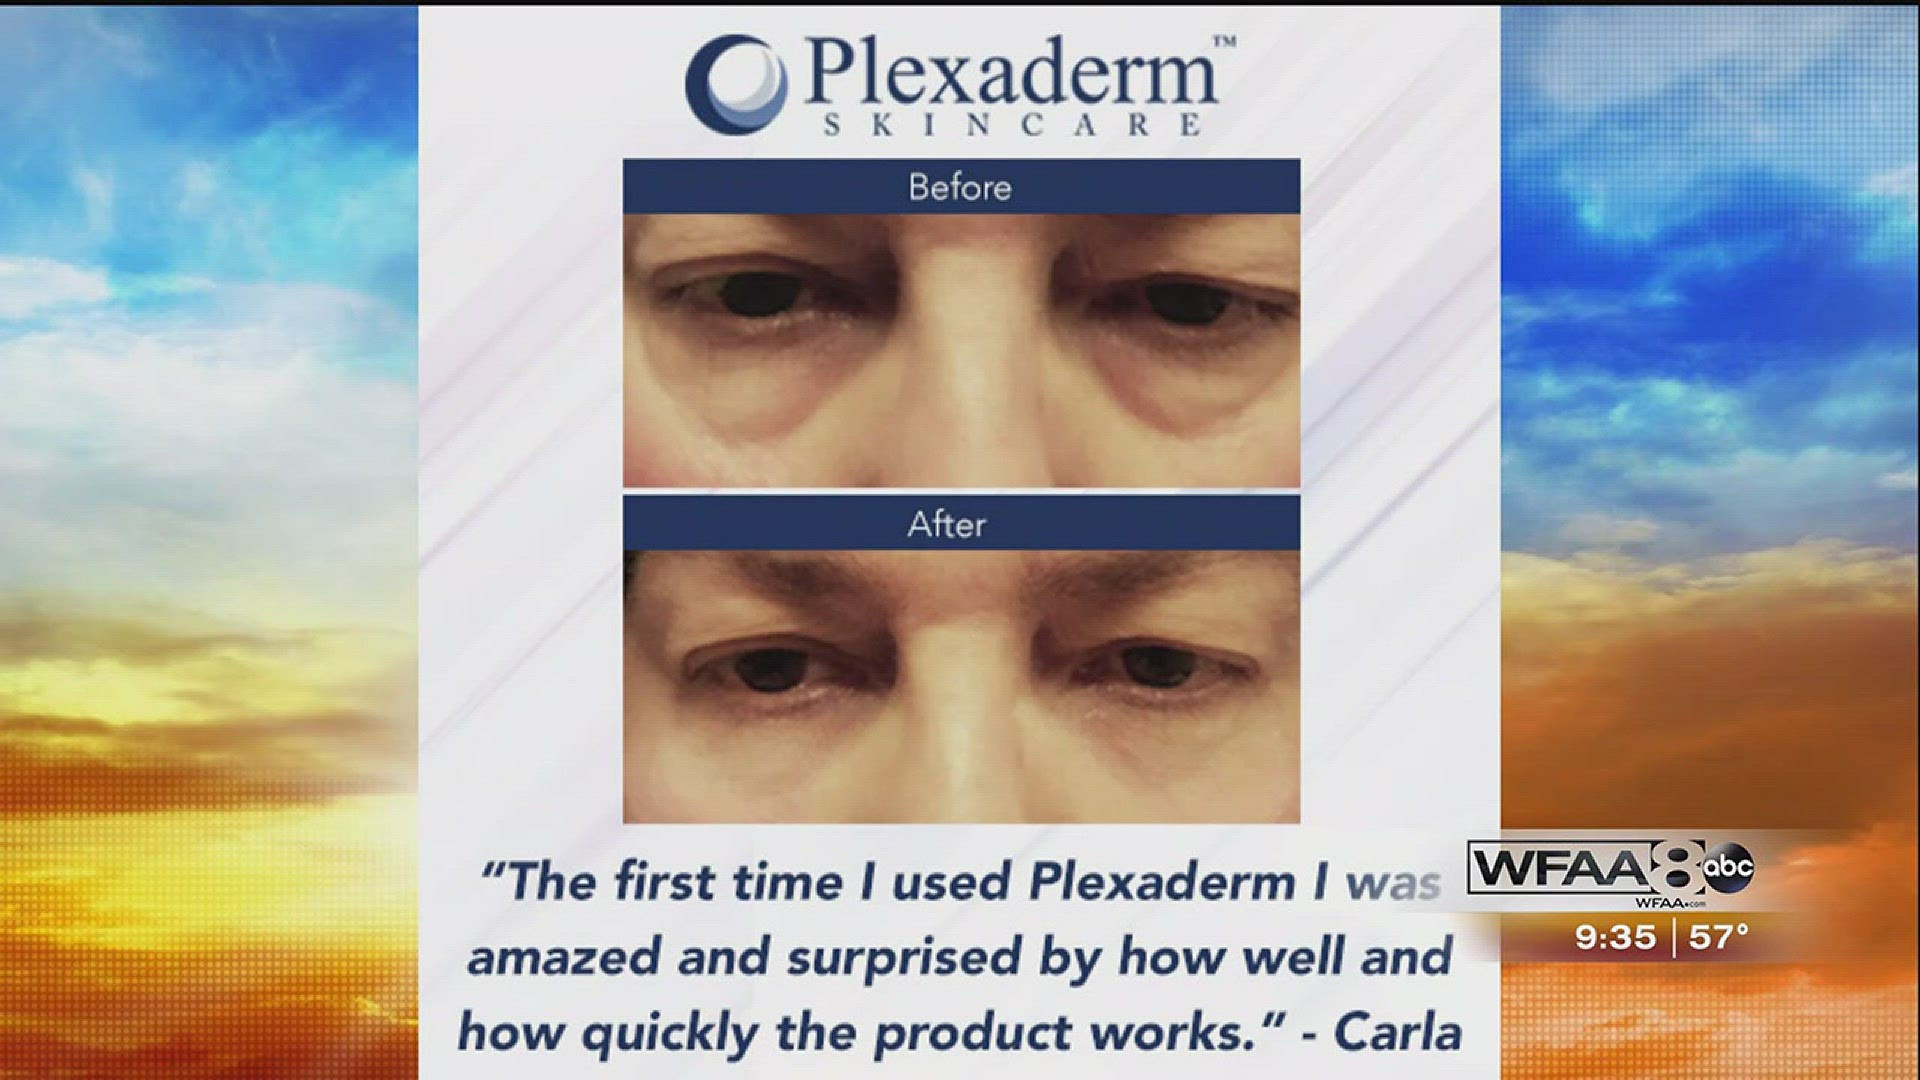 Call (800) 660-5516 for more information or go to www.pleaxderm.com.